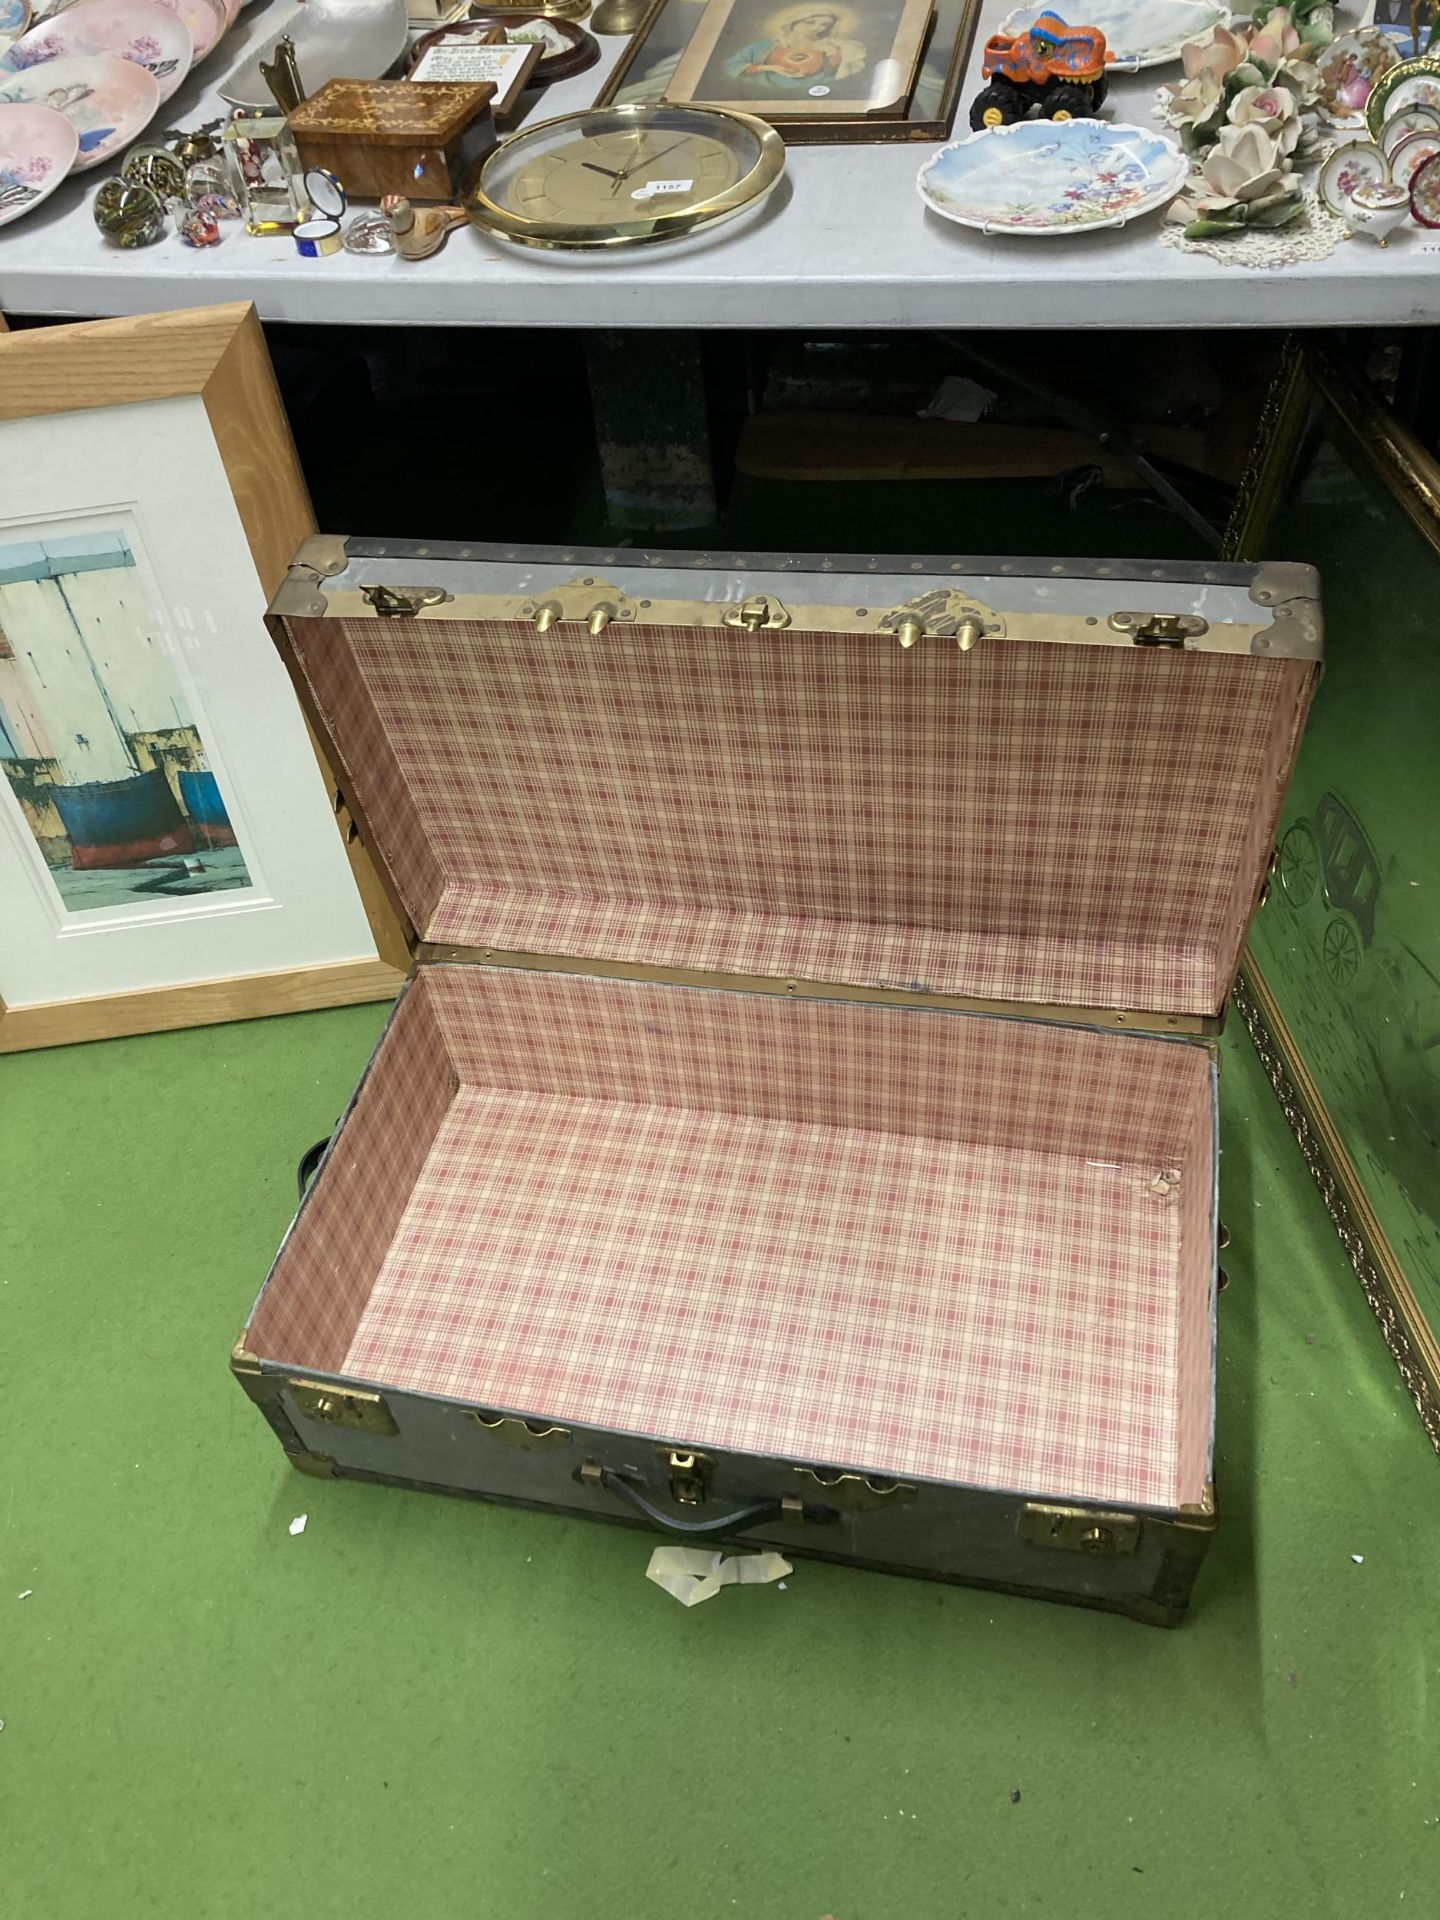 A VINTAGE GREY TRAVELLING TRUNK SUITCASE - Image 2 of 3